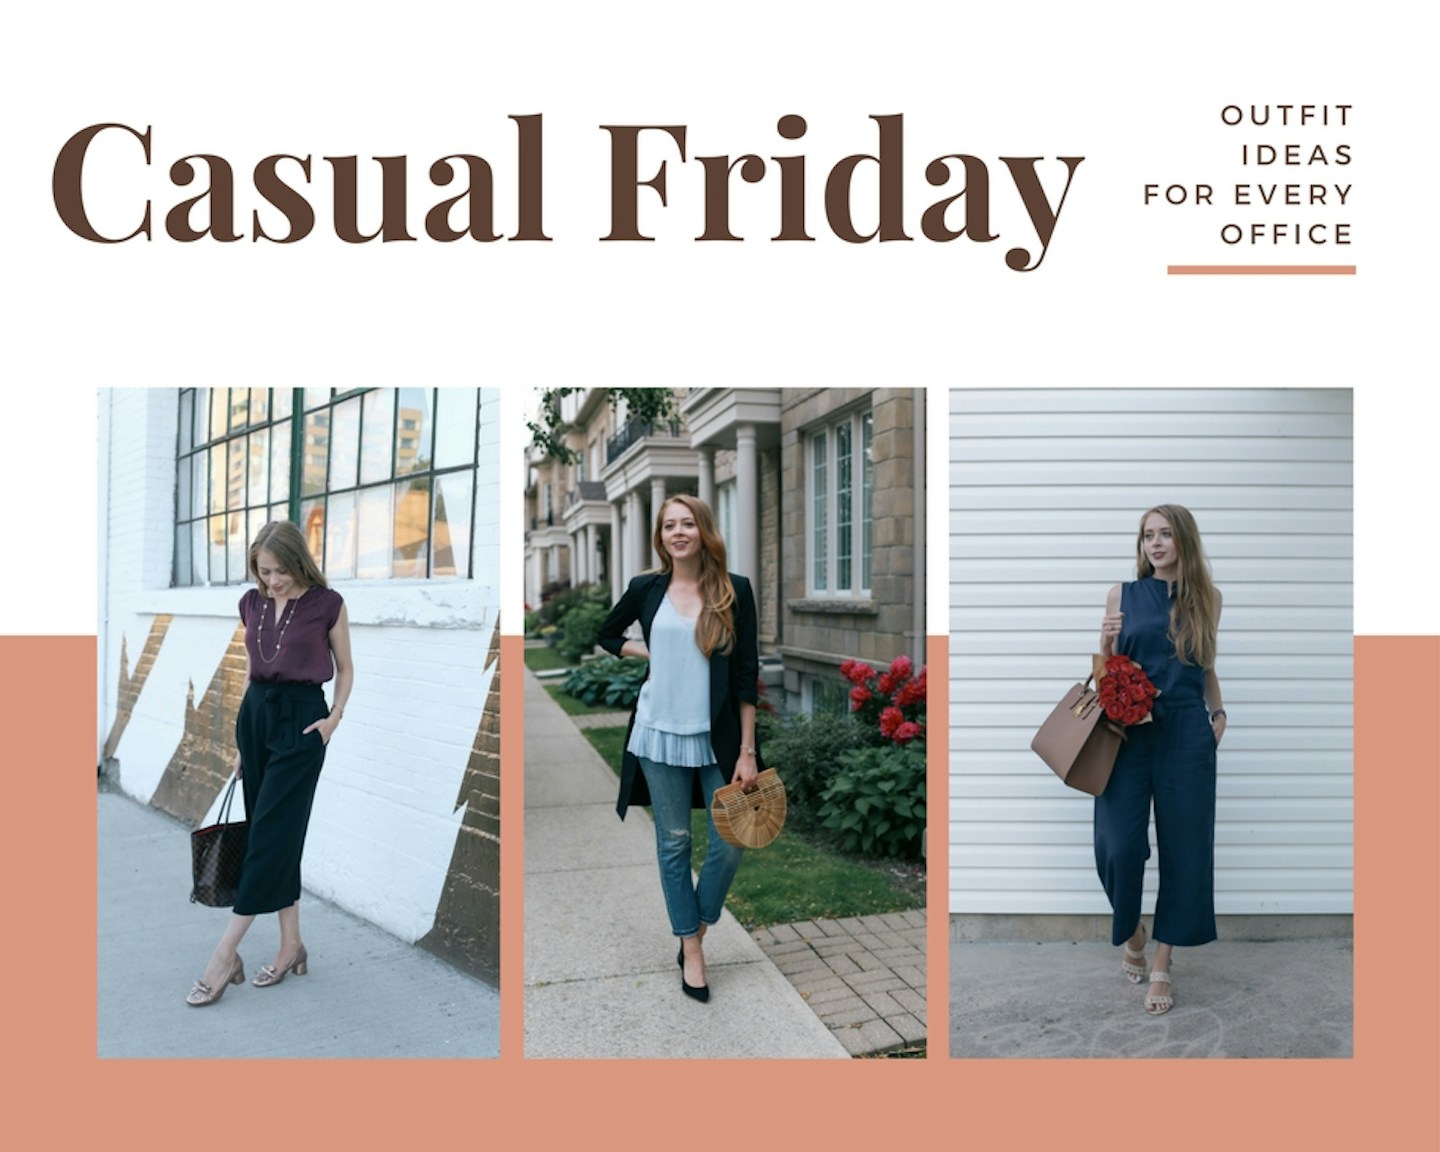 Casual friday outfit ideas